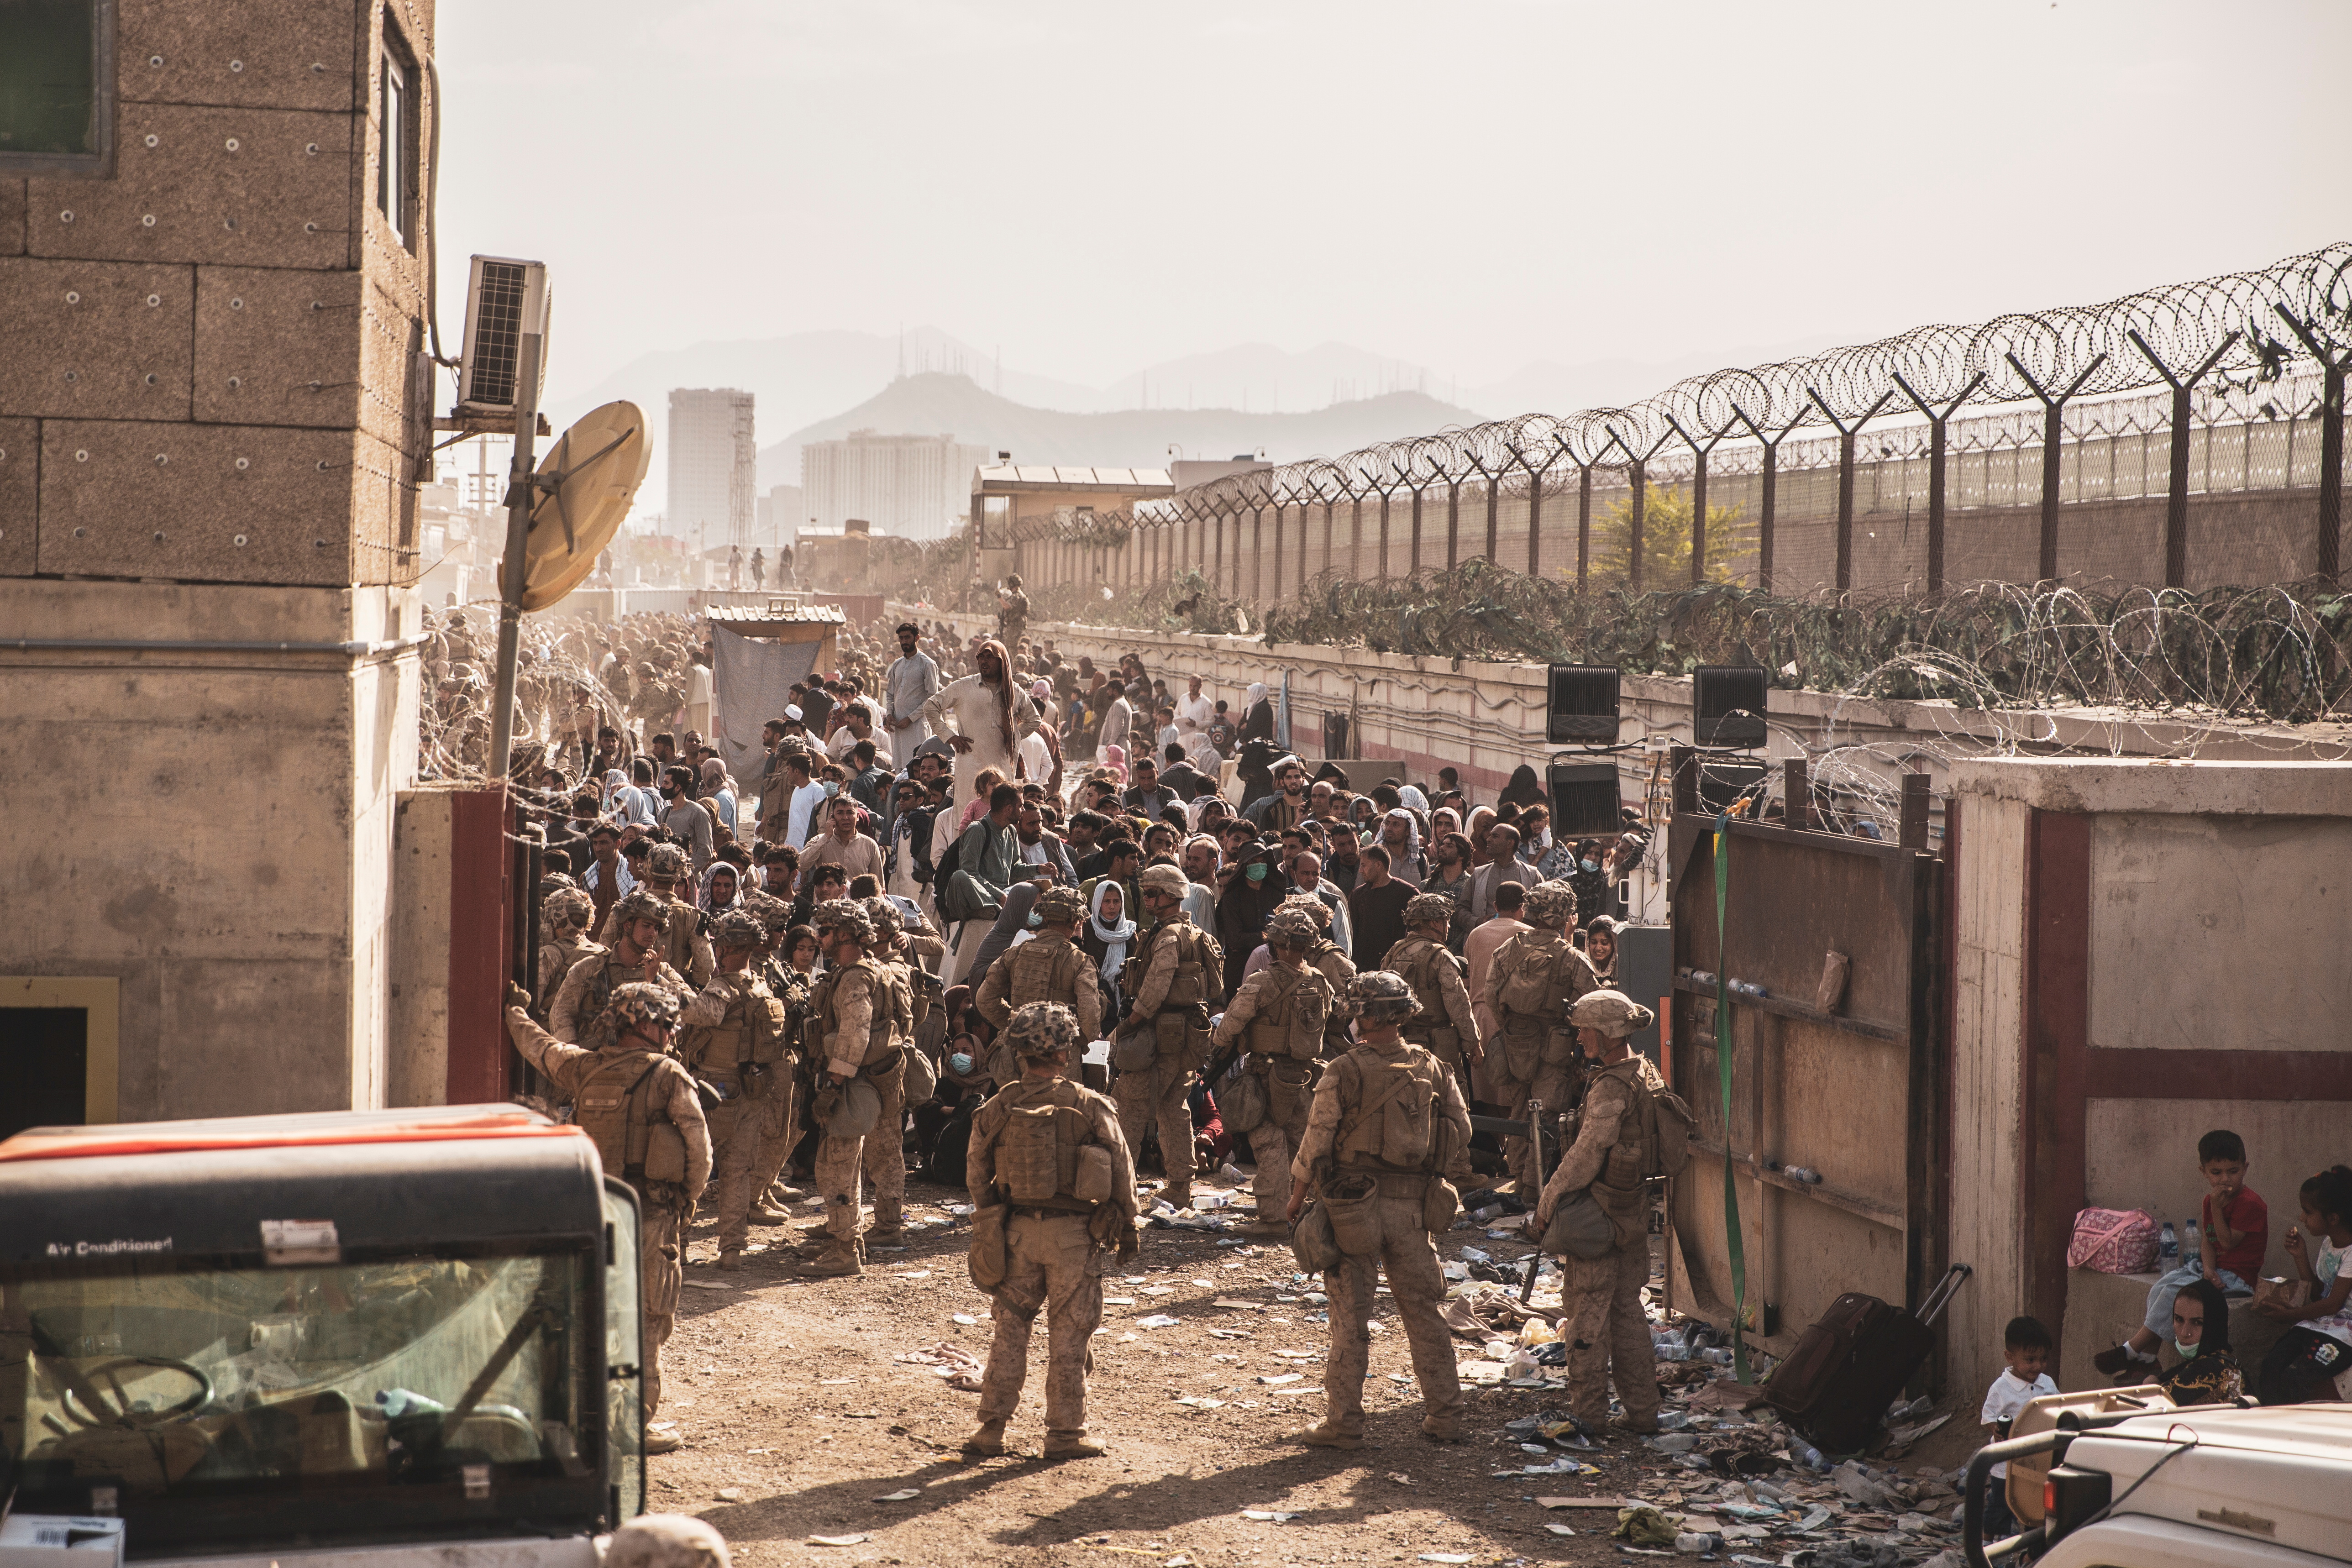 U.S. Marines provide assistance at an Evacuation Control Checkpoint (ECC) during an evacuation at Hamid Karzai International Airport, Afghanistan, August 22, 2021. Picture taken August 22, 2021.  U.S. Marine Corps/Staff Sgt. Victor Mancilla/Handout via REUTERS.